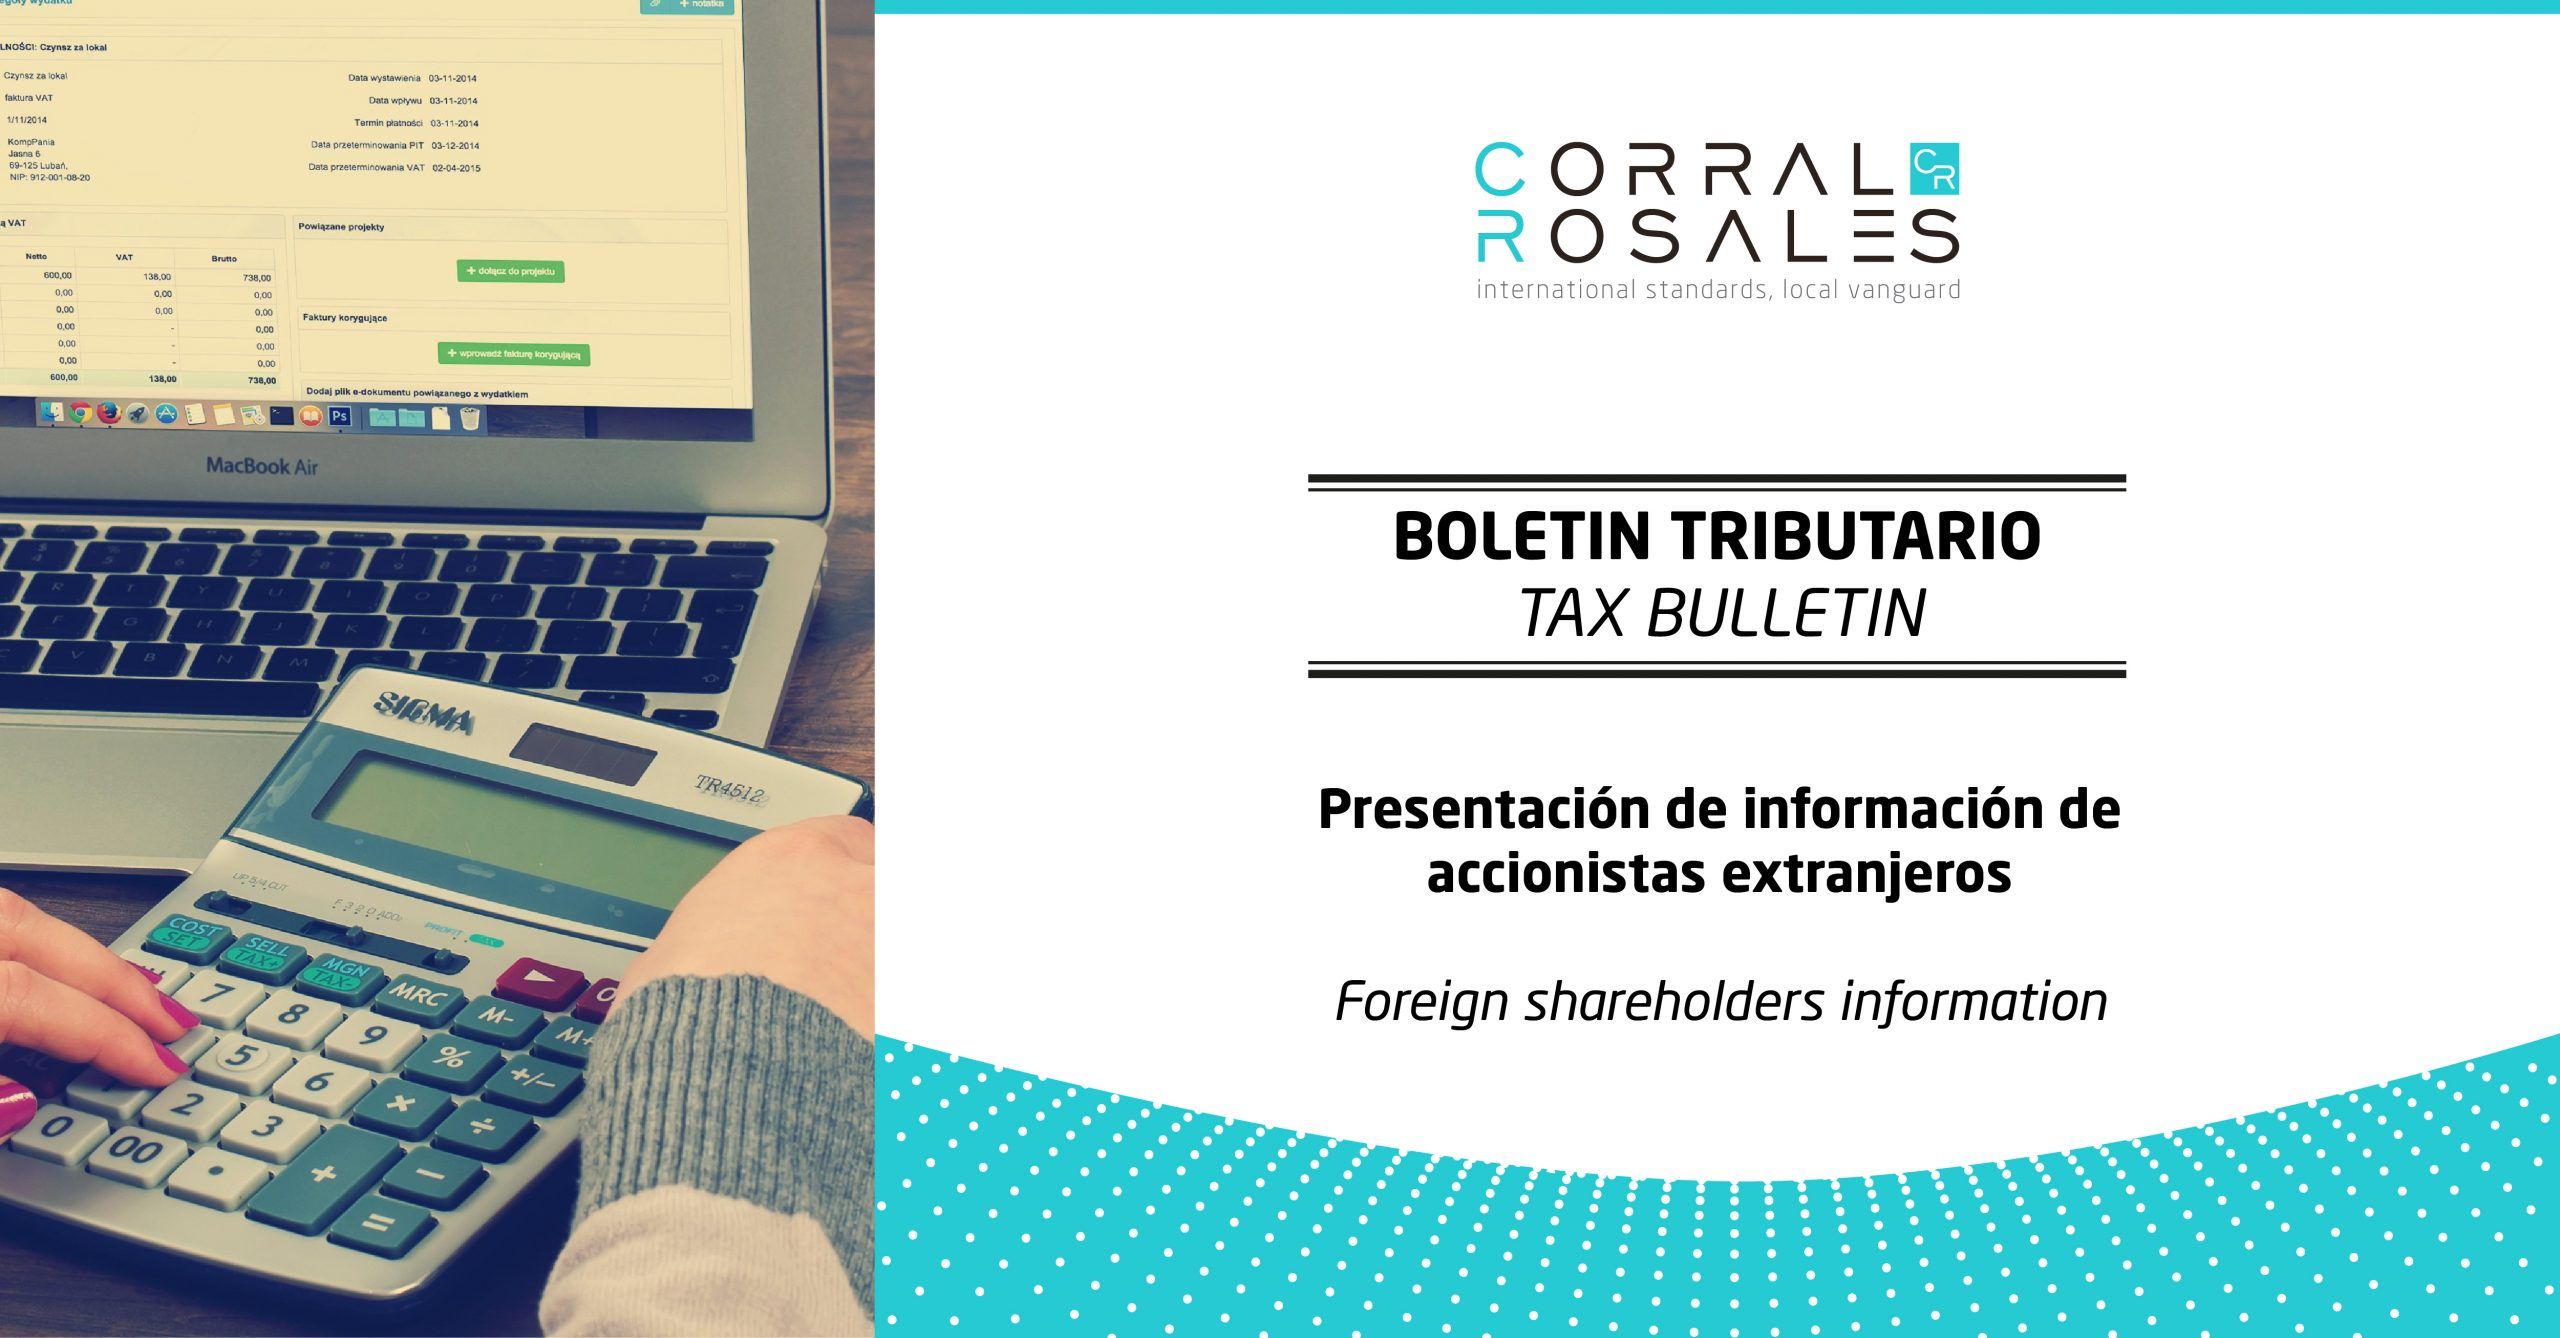 foreign-shareholders-information-corral-rosales-lawyers-ecuador